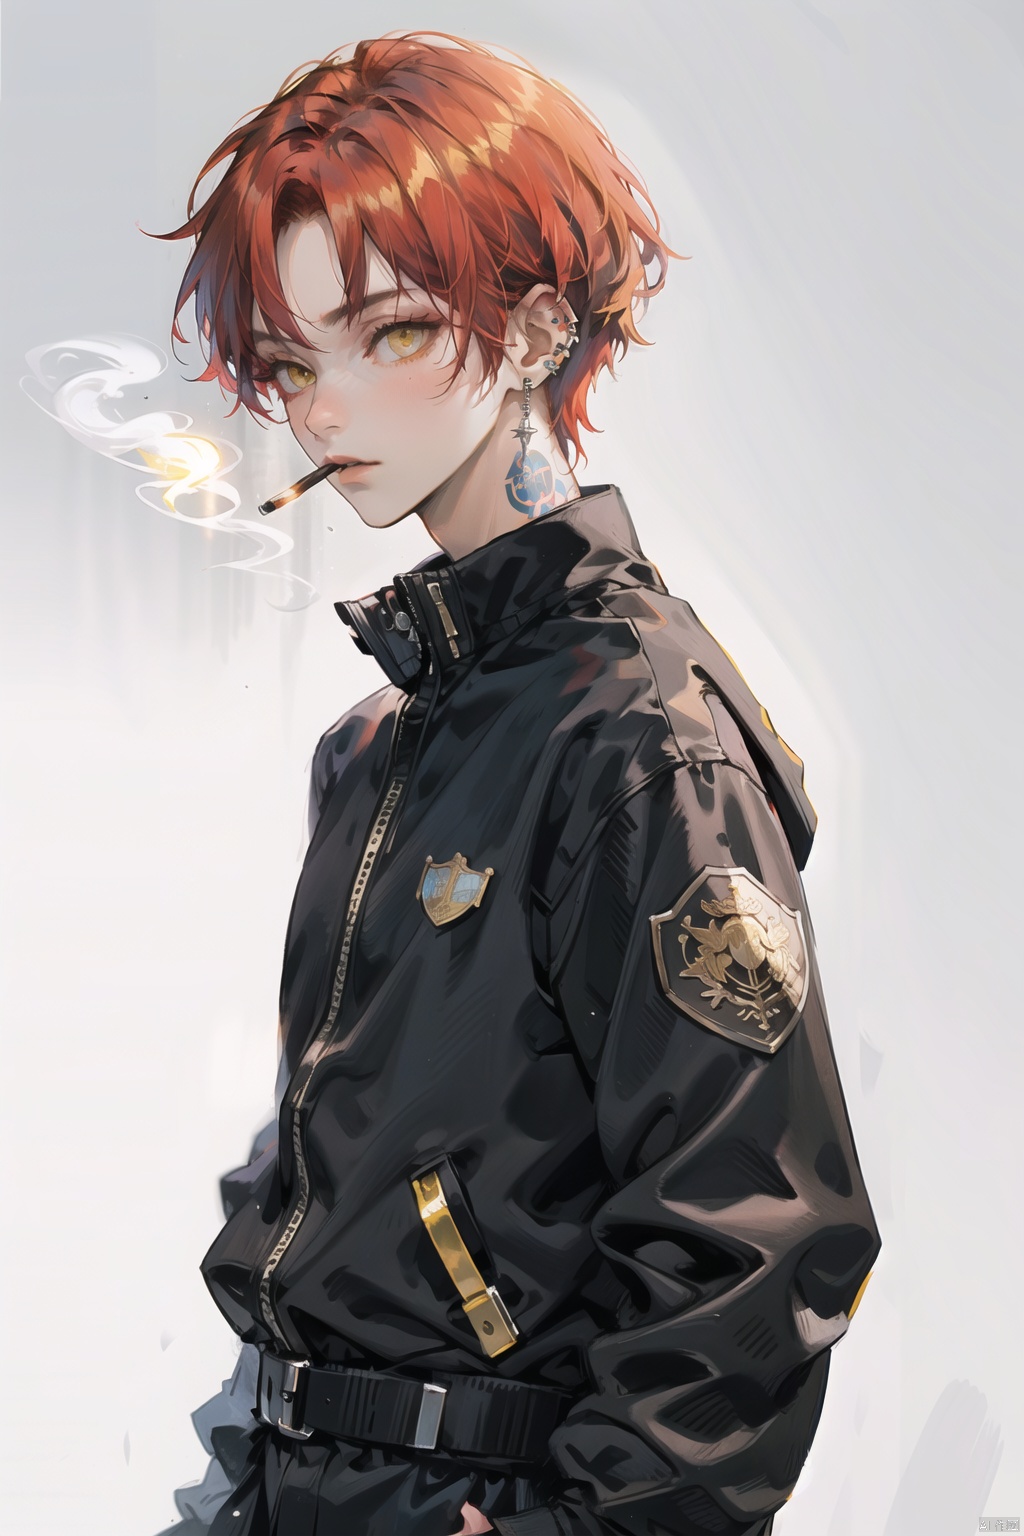 Best quality, masterpiece, 1boy, red hair, short hair, yellow eyes, spiky hair, tattoos, black pants, upper body, ear piercings, blue and white bomber jacket, profile picture, smoking